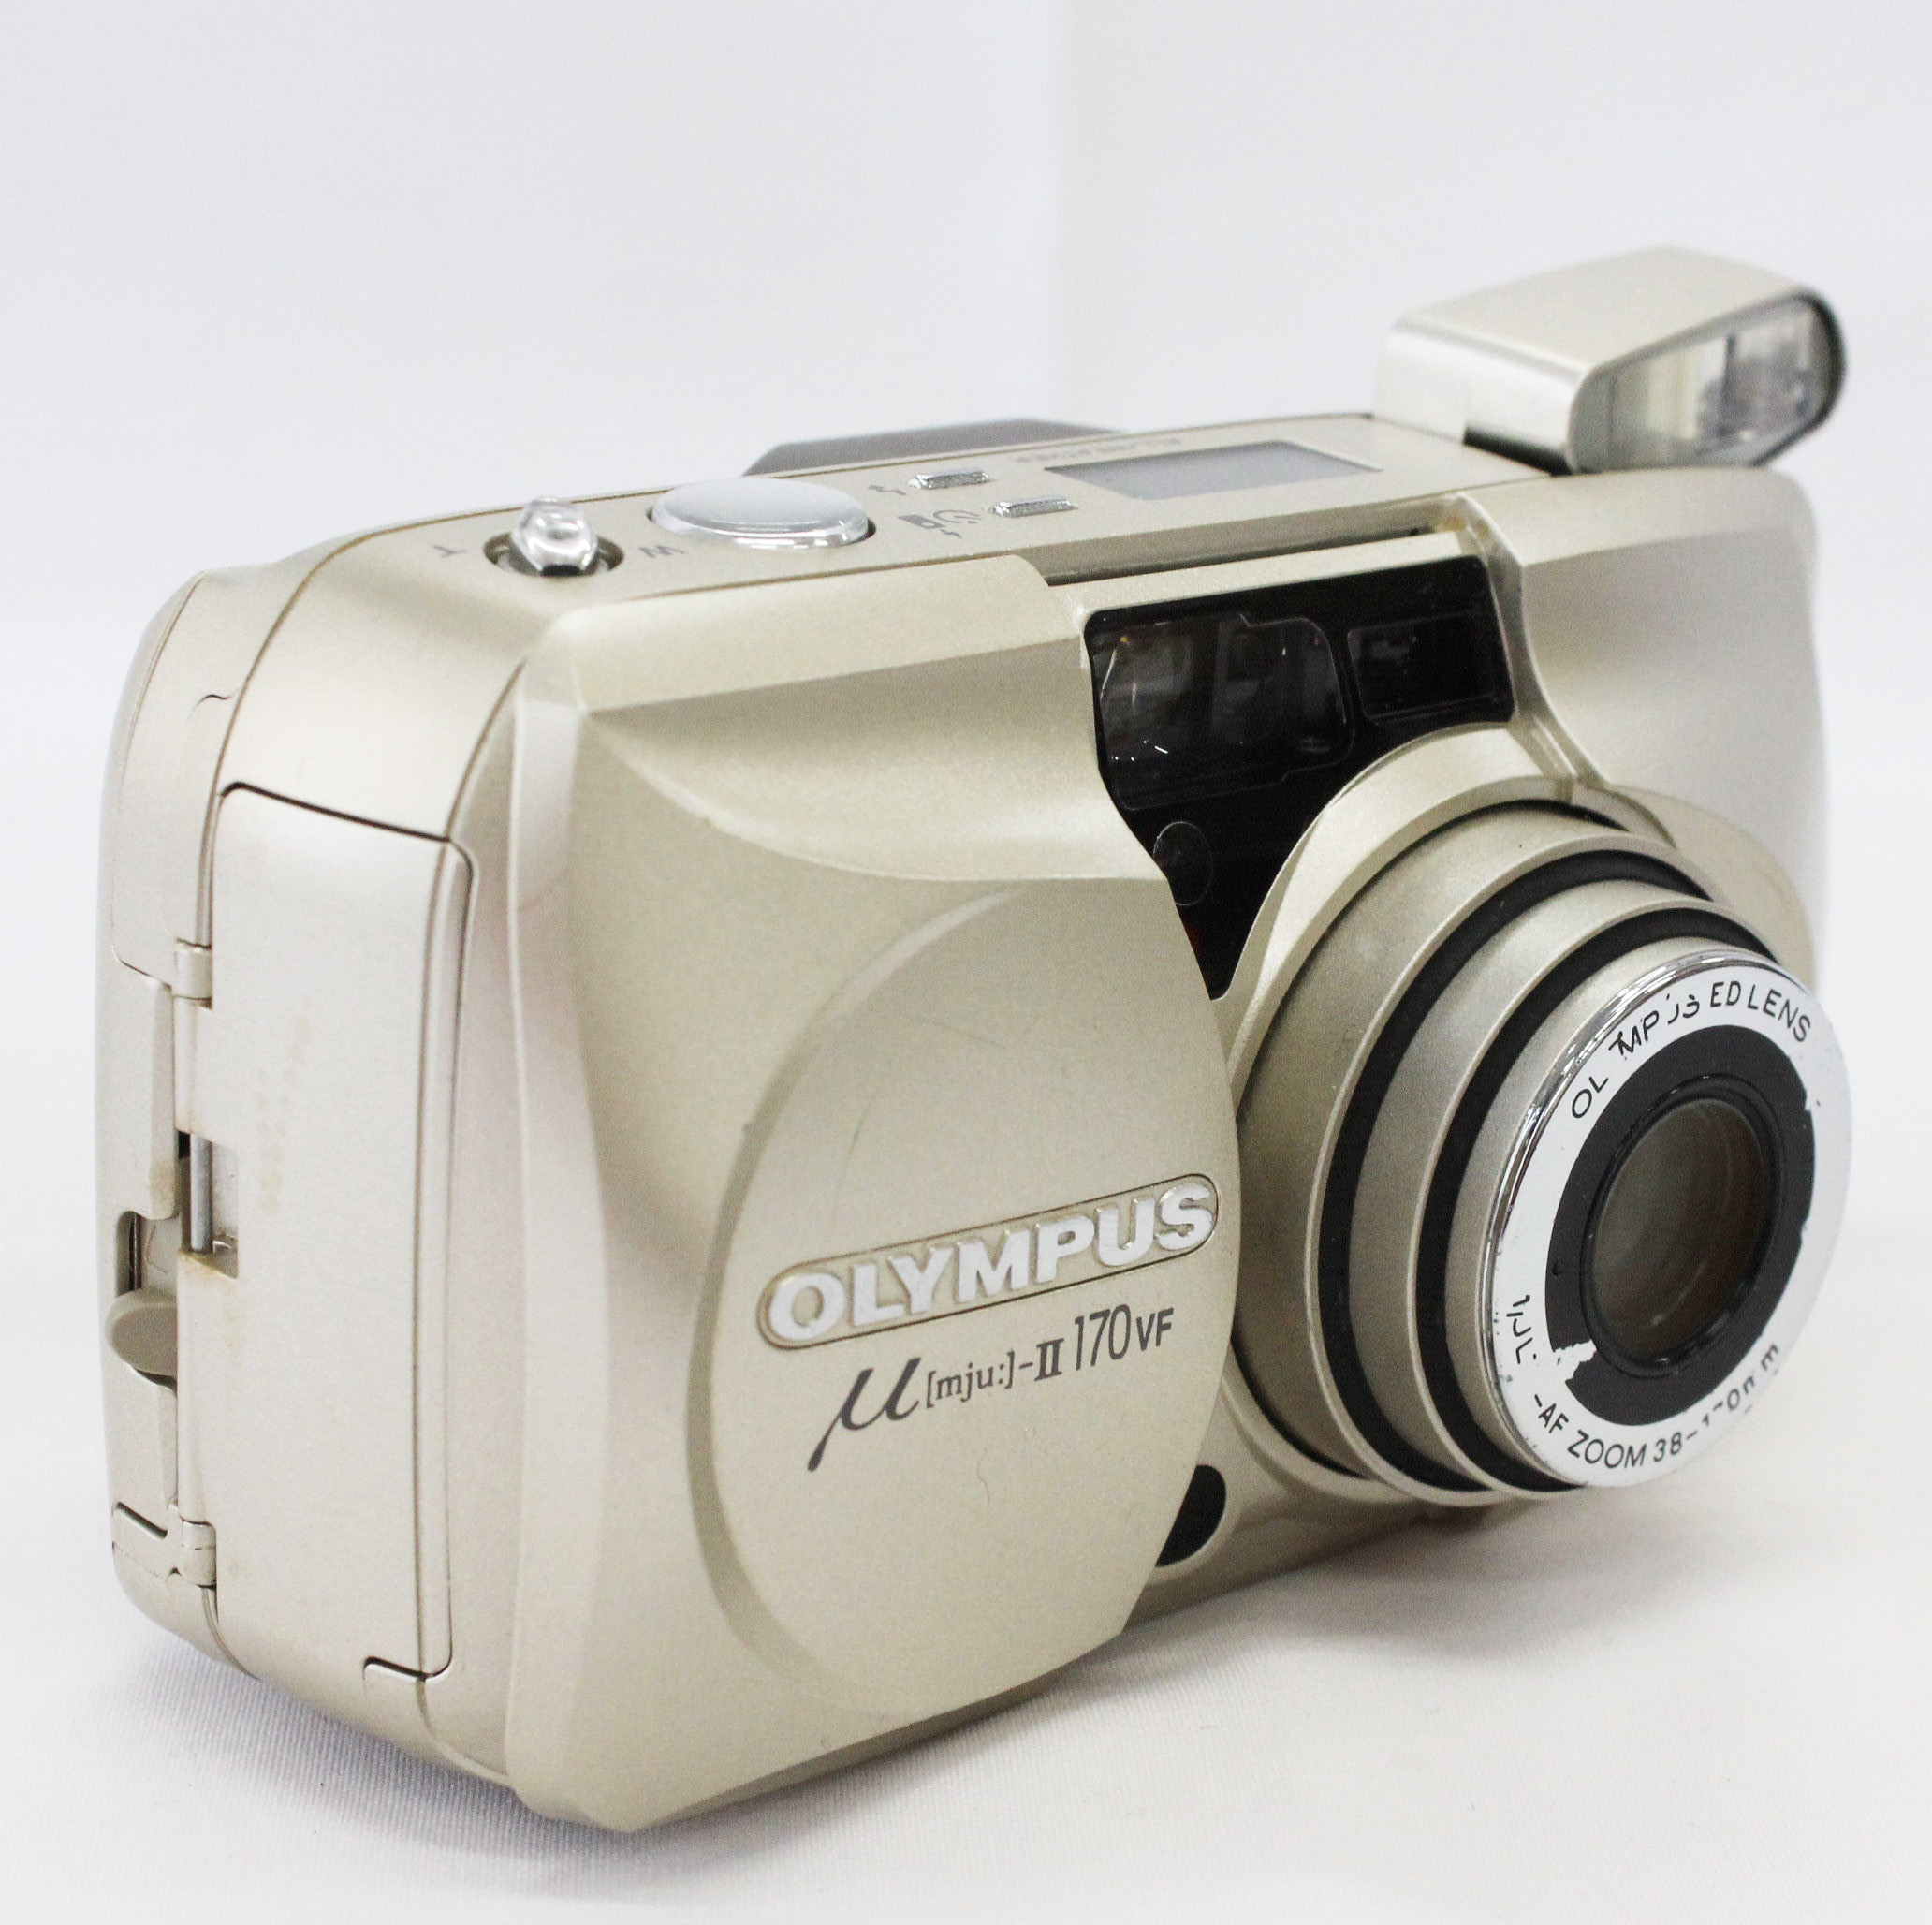  Olympus μ MJU II 170 VF Multi-AF Zoom 35mm Point & Shoot Film Camera with Remote Control RC-300C from Japan Photo 3